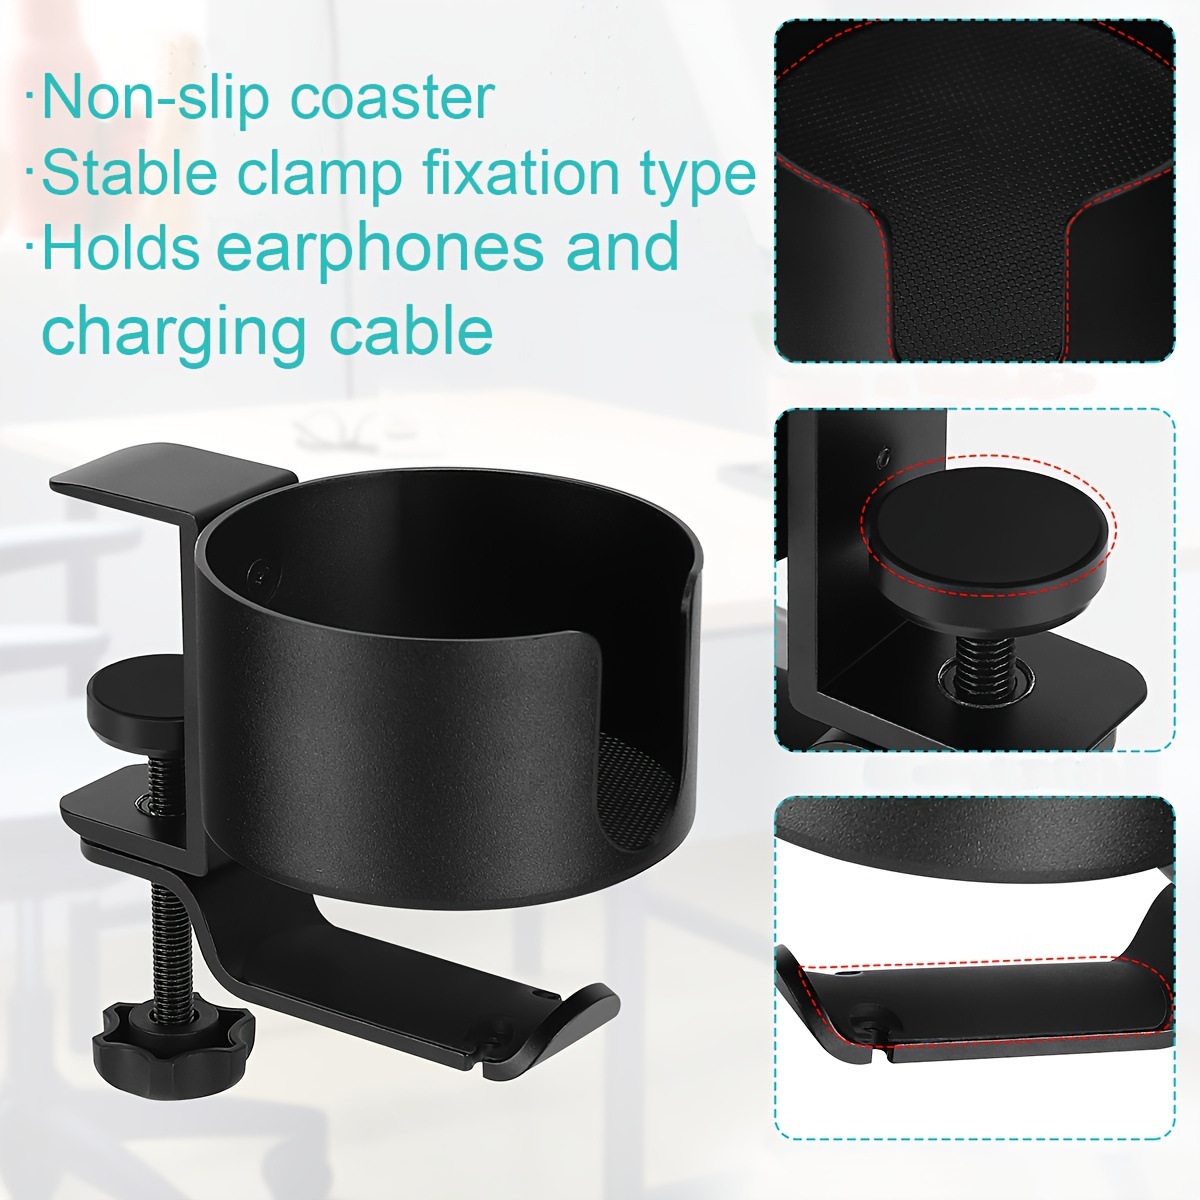 Desk Cup Holder,2 in 1 Desk Cup Holder with Headphone Hanger, Anti-Spill  Cup Holder for Desk or Table, Easy to Install, Sturdy and Durable 